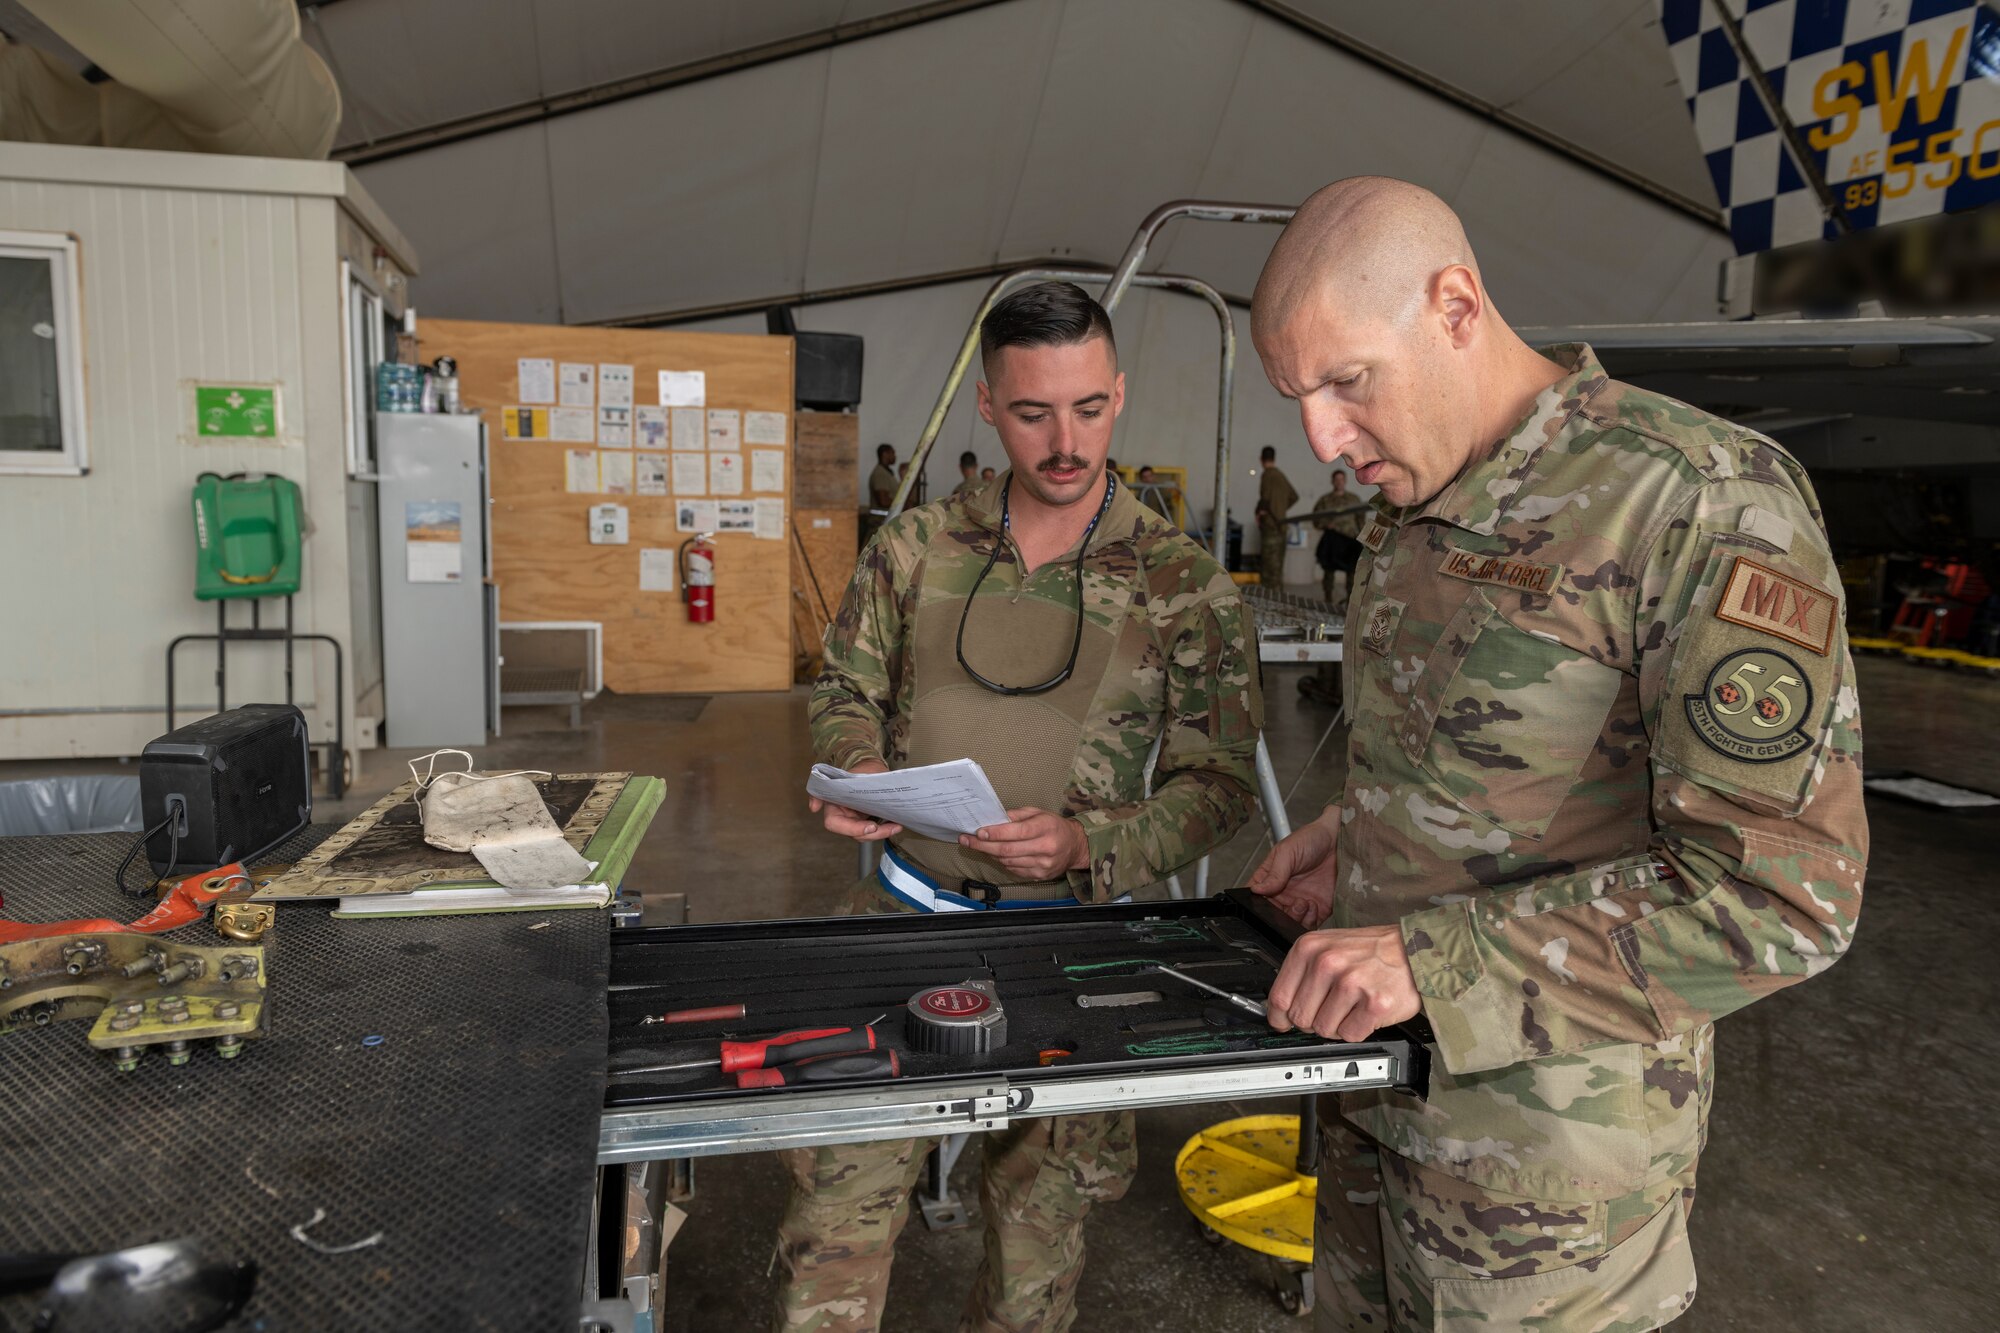 U.S. Air Force Airman 1st Class John Ferguson, left, 55th Expeditionary Fighter Generation Squadron support technician, runs through a toolbox check with Chief Master Sgt. Sean Milligan, 332nd Air Expeditionary Wing command chief, Nov. 13, 2021, at an undisclosed location somewhere in Southwest Asia. The 55th EFGS store and inspect equipment for five maintenance sections responsible for maintaining F-16C Fighting Falcons. (U.S. Air Force photo by Senior Airman Cameron Otte)